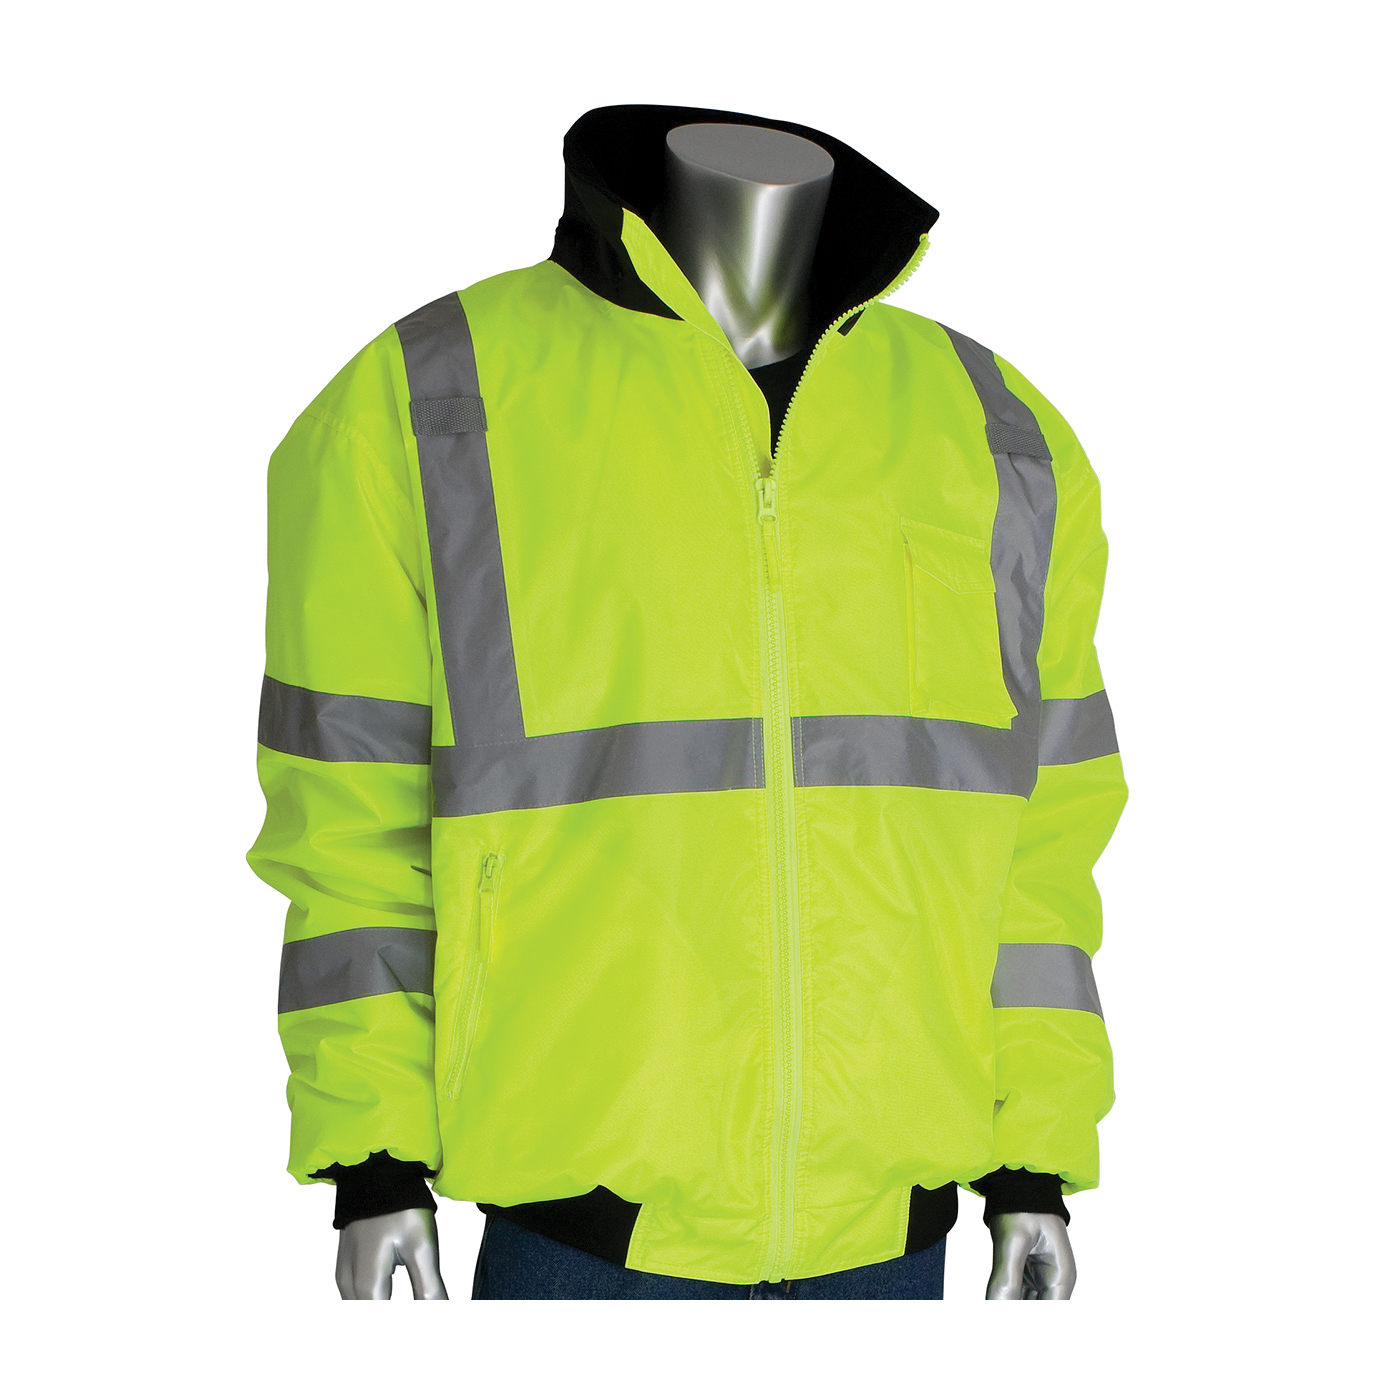 PIP® 333-1762-LY/6X Bomber Jacket With Zip-Out Fleece Liner, Hi-Viz Lime Yellow, Polyester, Resists: Water, ANSI Type R Class 3